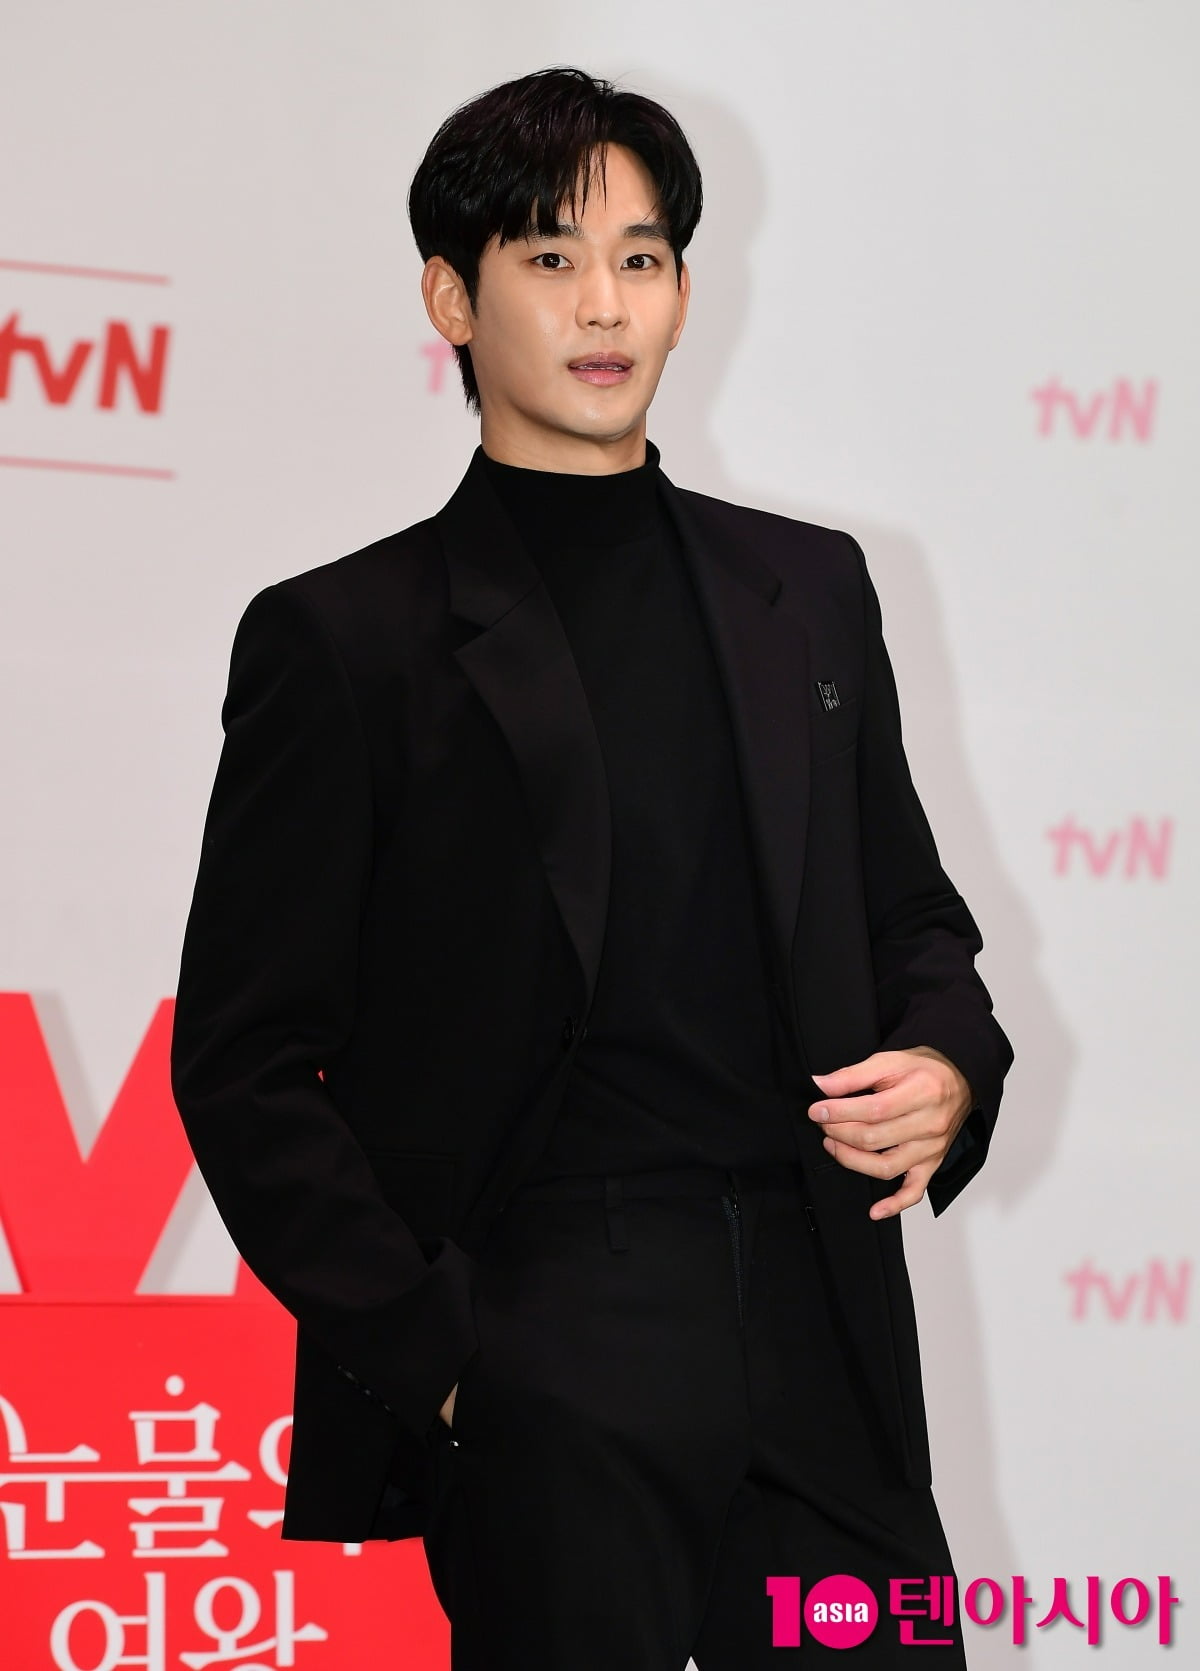 'Queen of Tears' side "Kim Soo-hyun's appearance fee is 800 million NO per episode"